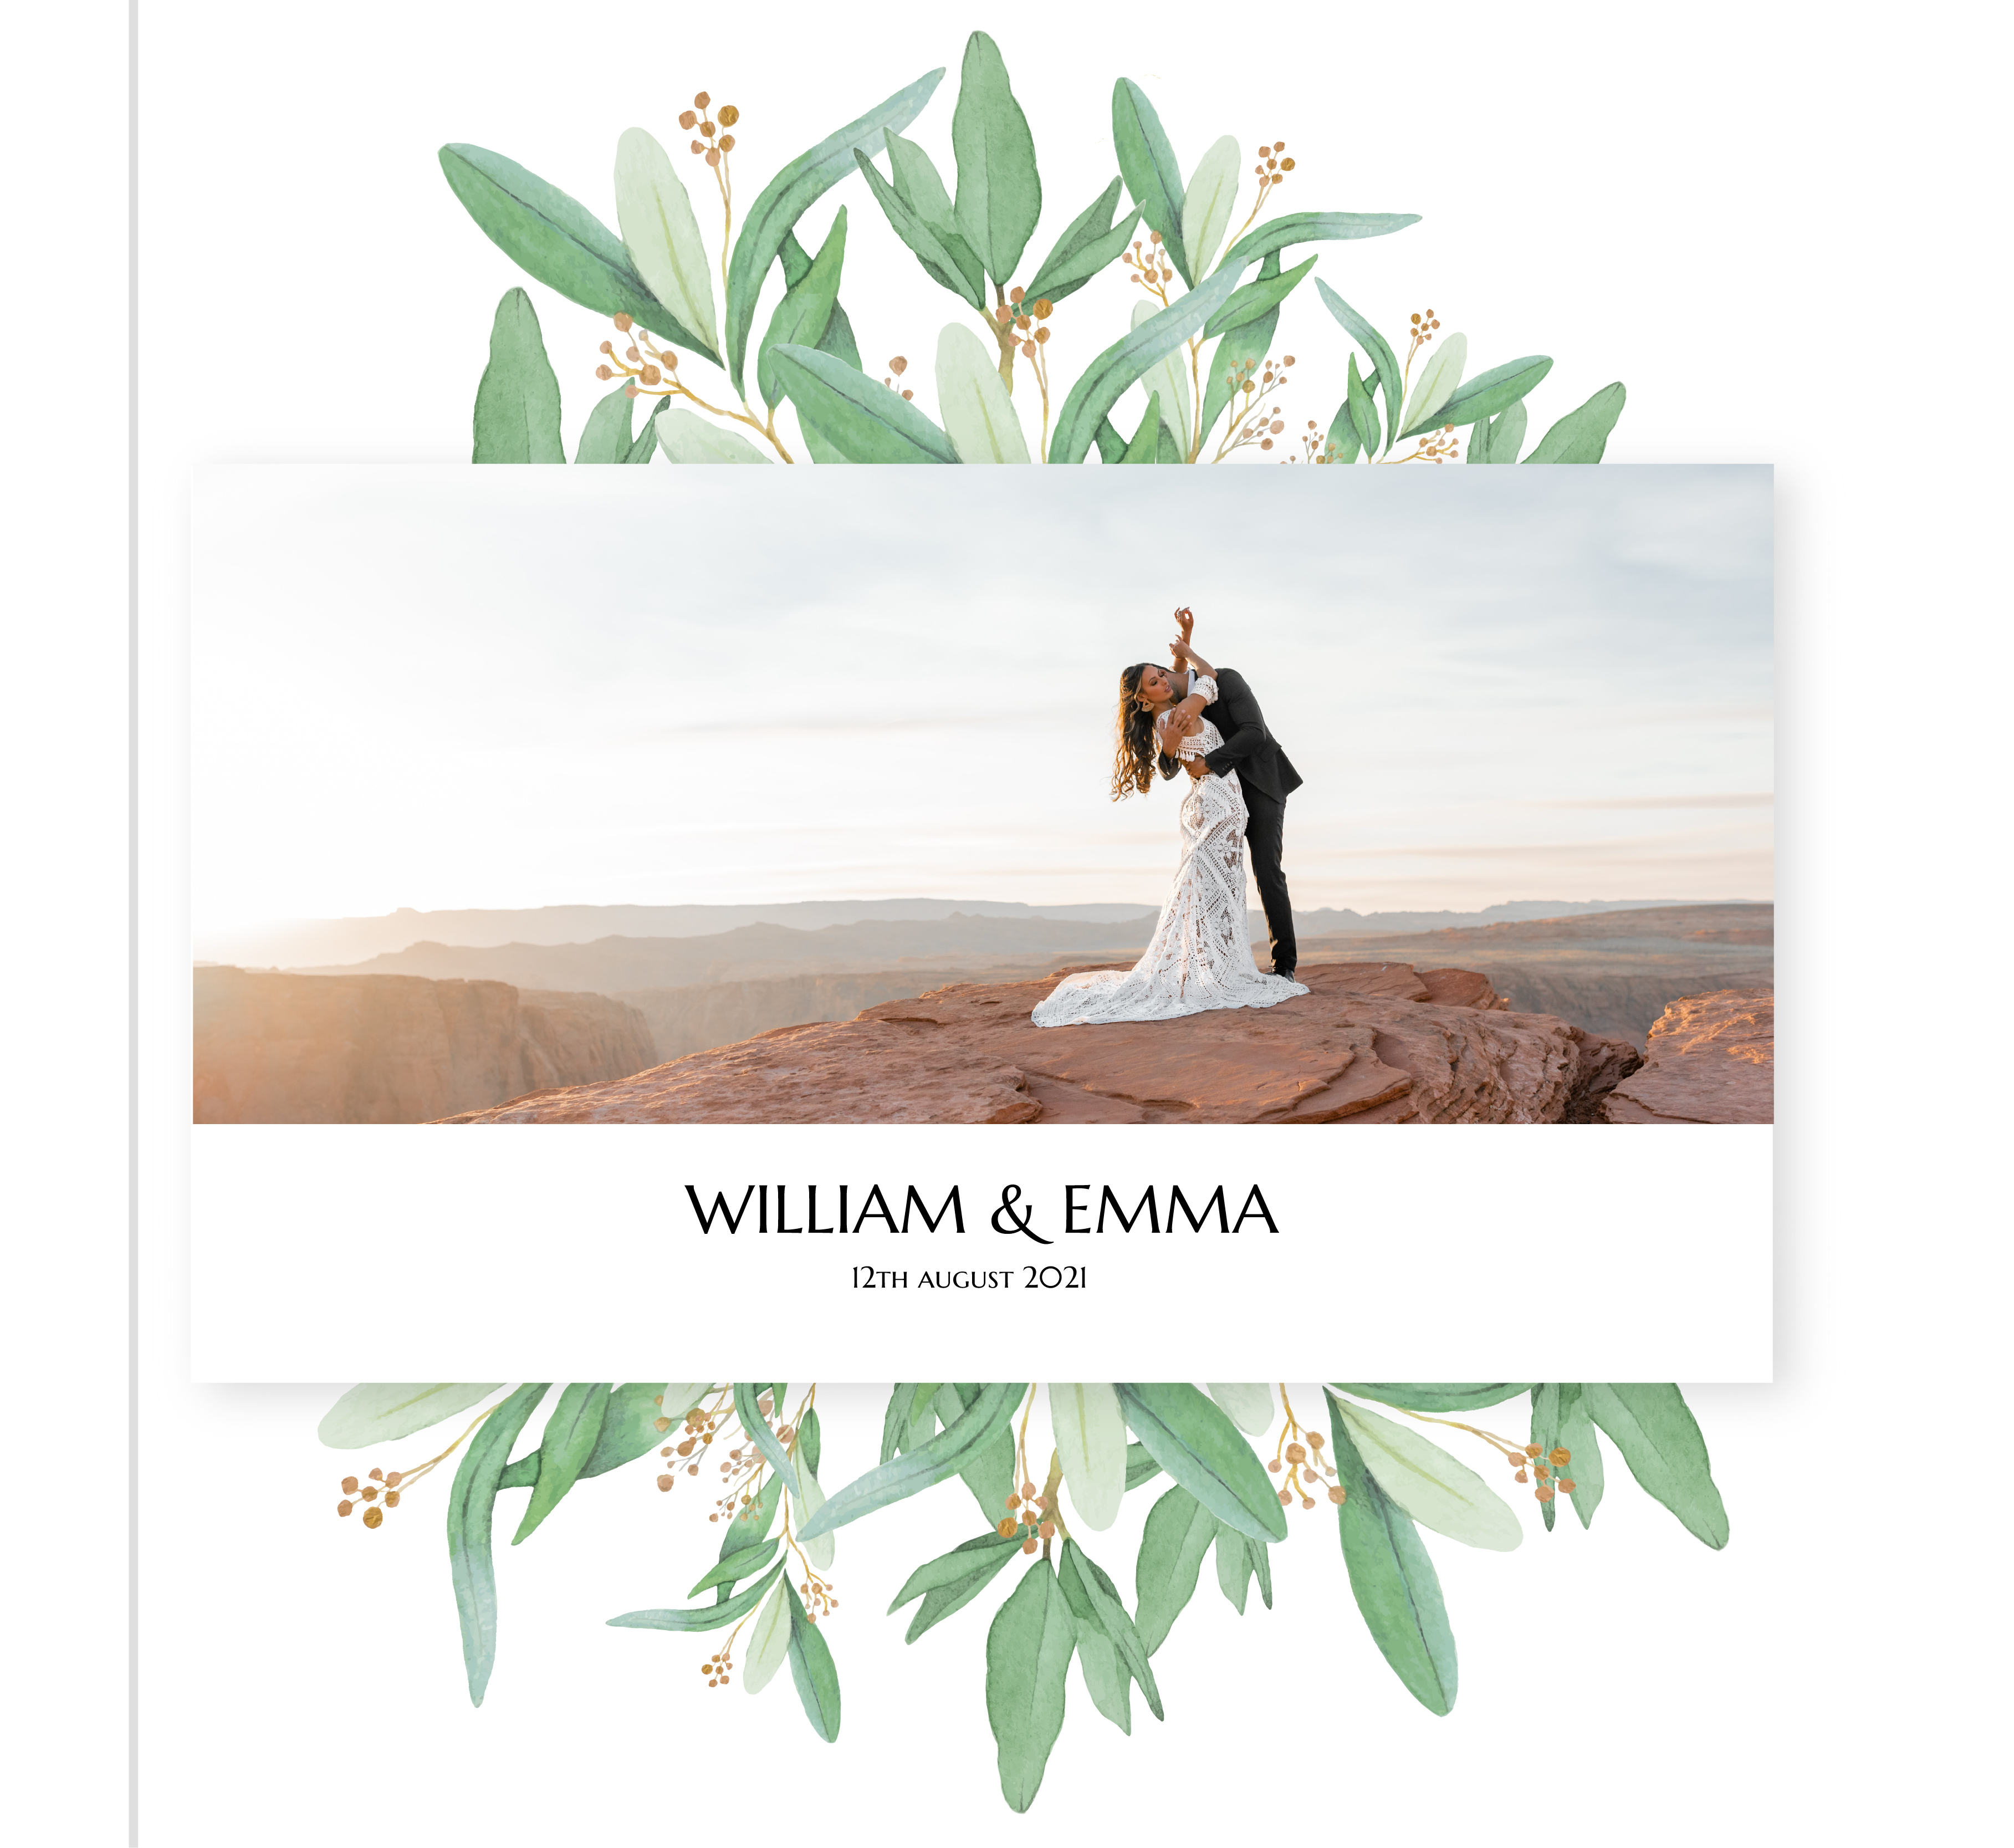 Wedding album with photo cover showing couple on cliff